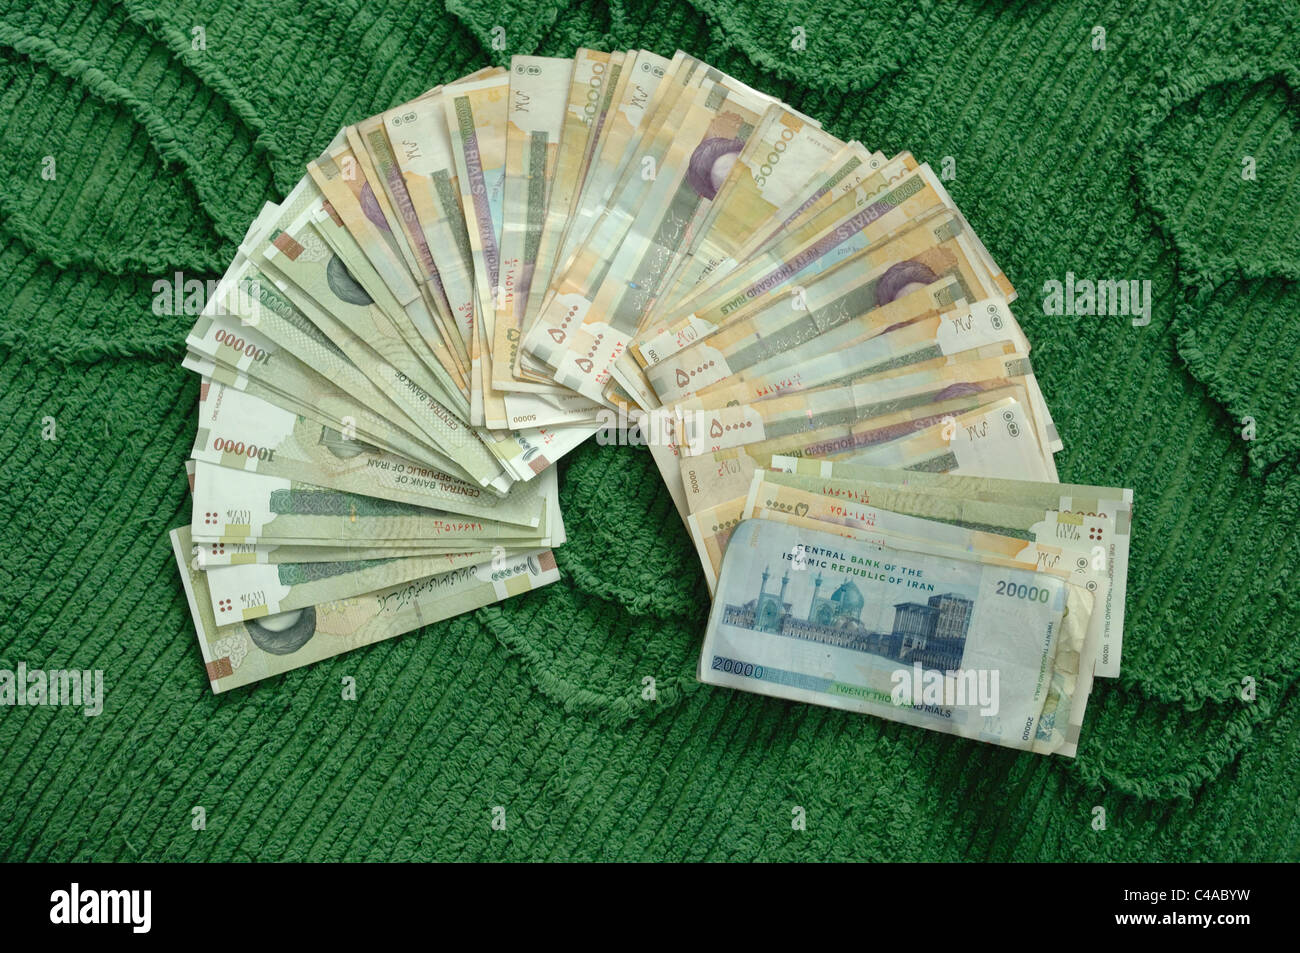 A fan of Iranian Rial bank notes Stock Photo